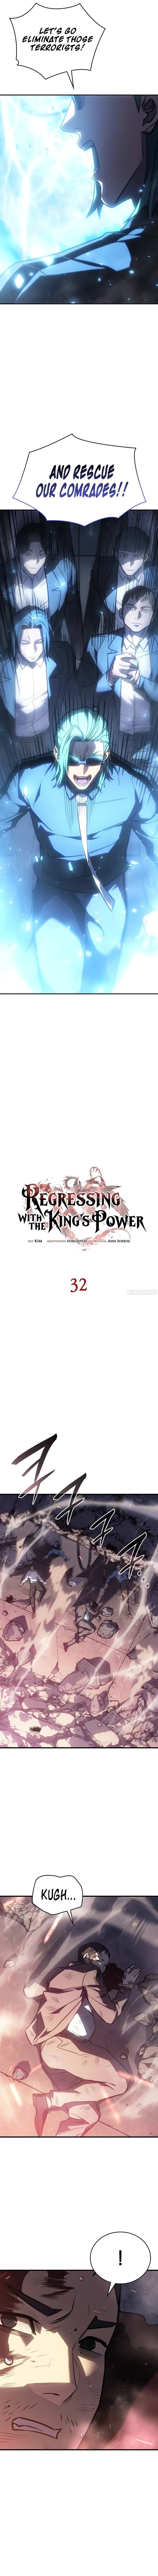 regressing-with-the-kings-power-chap-32-6